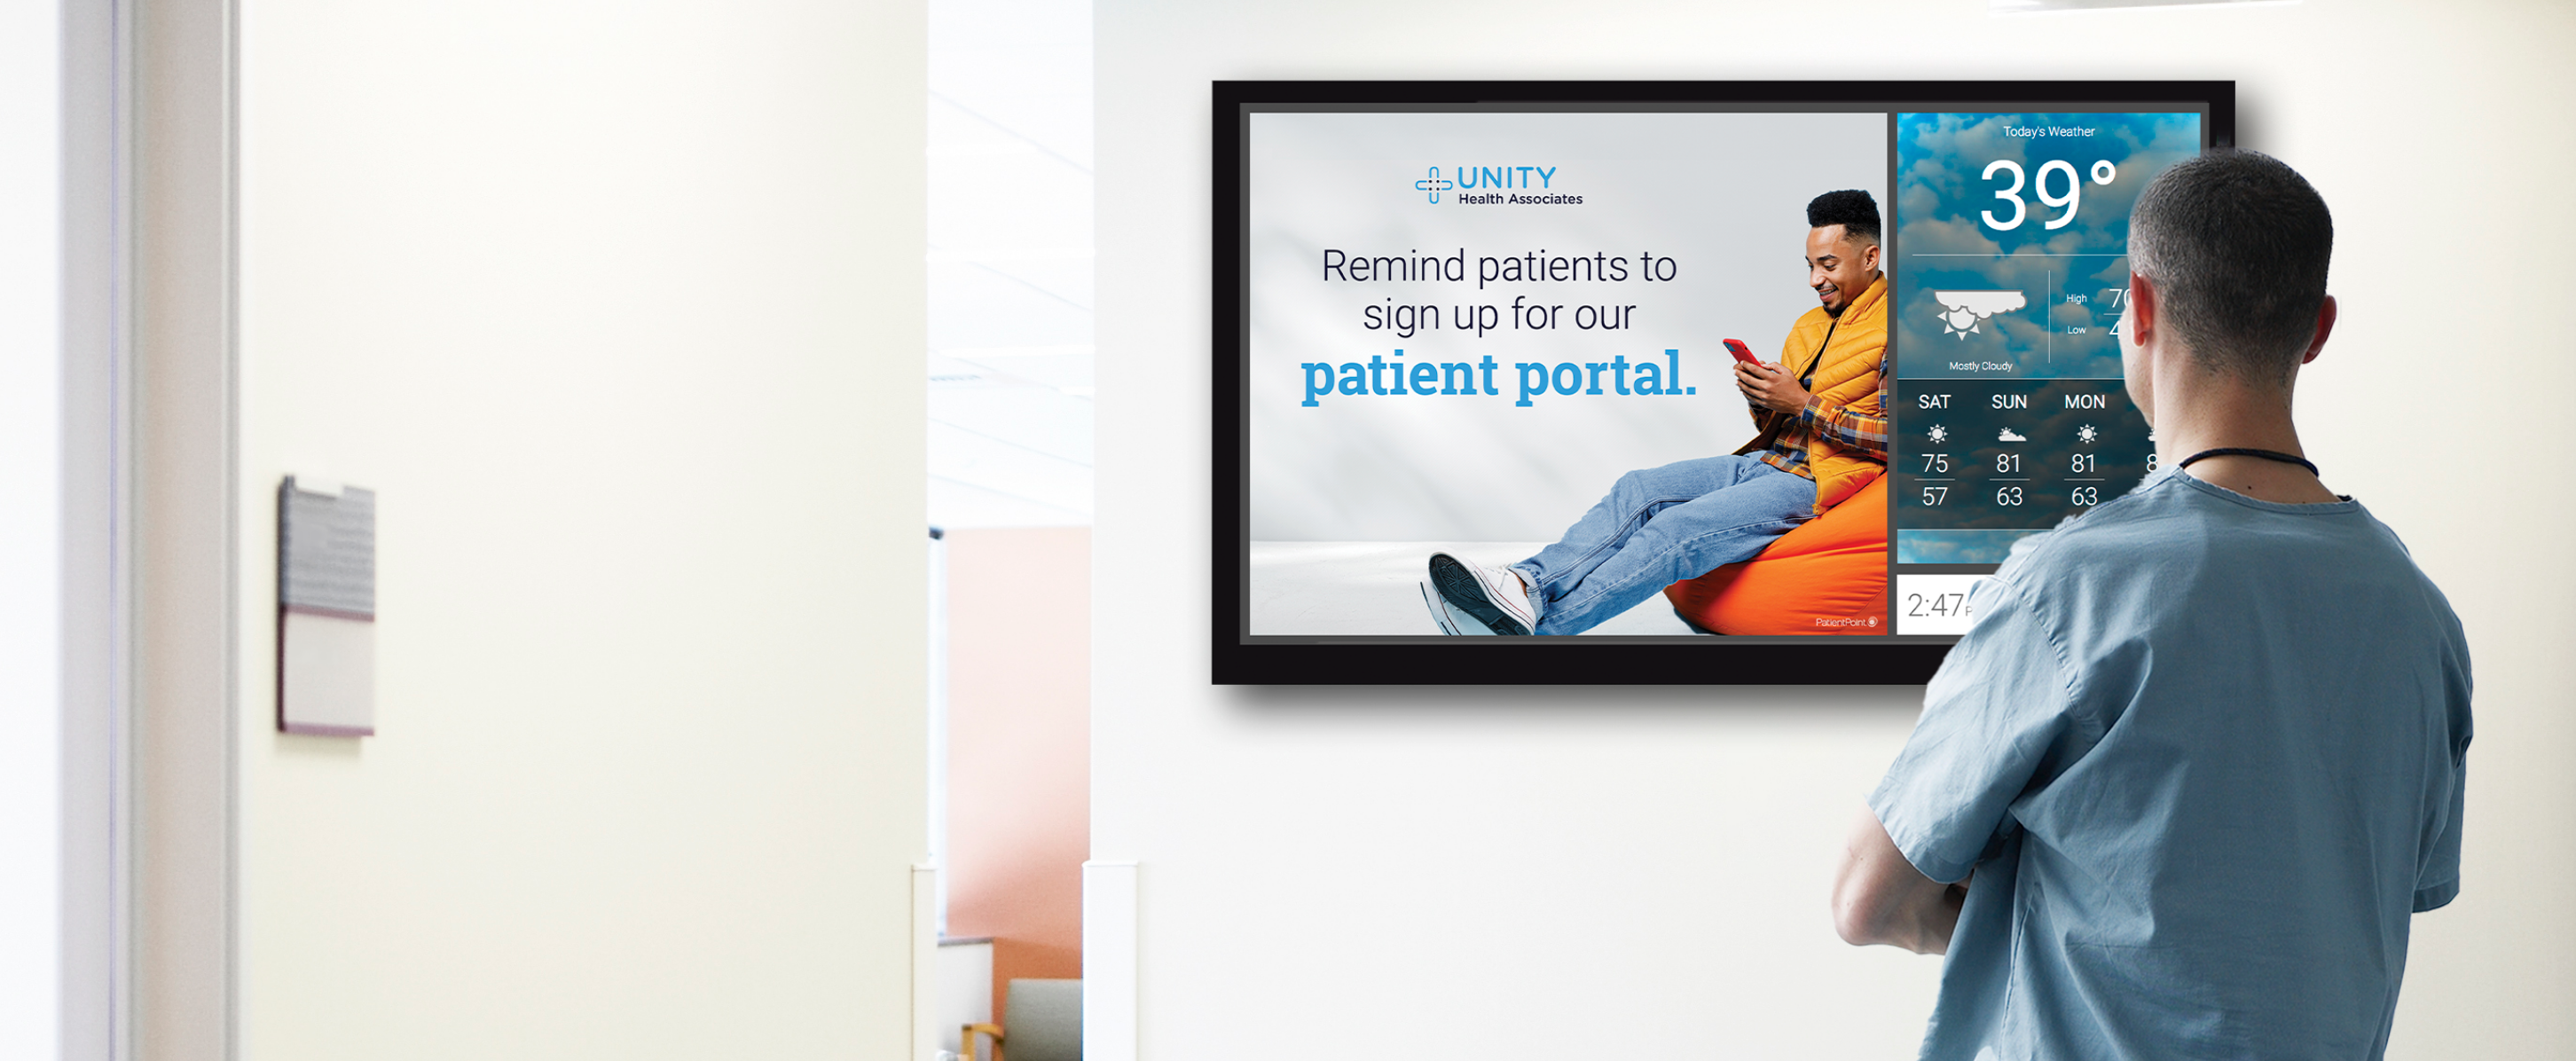 A provider looking at a back office screen saying "Remind patients to sign up for our patient portal"